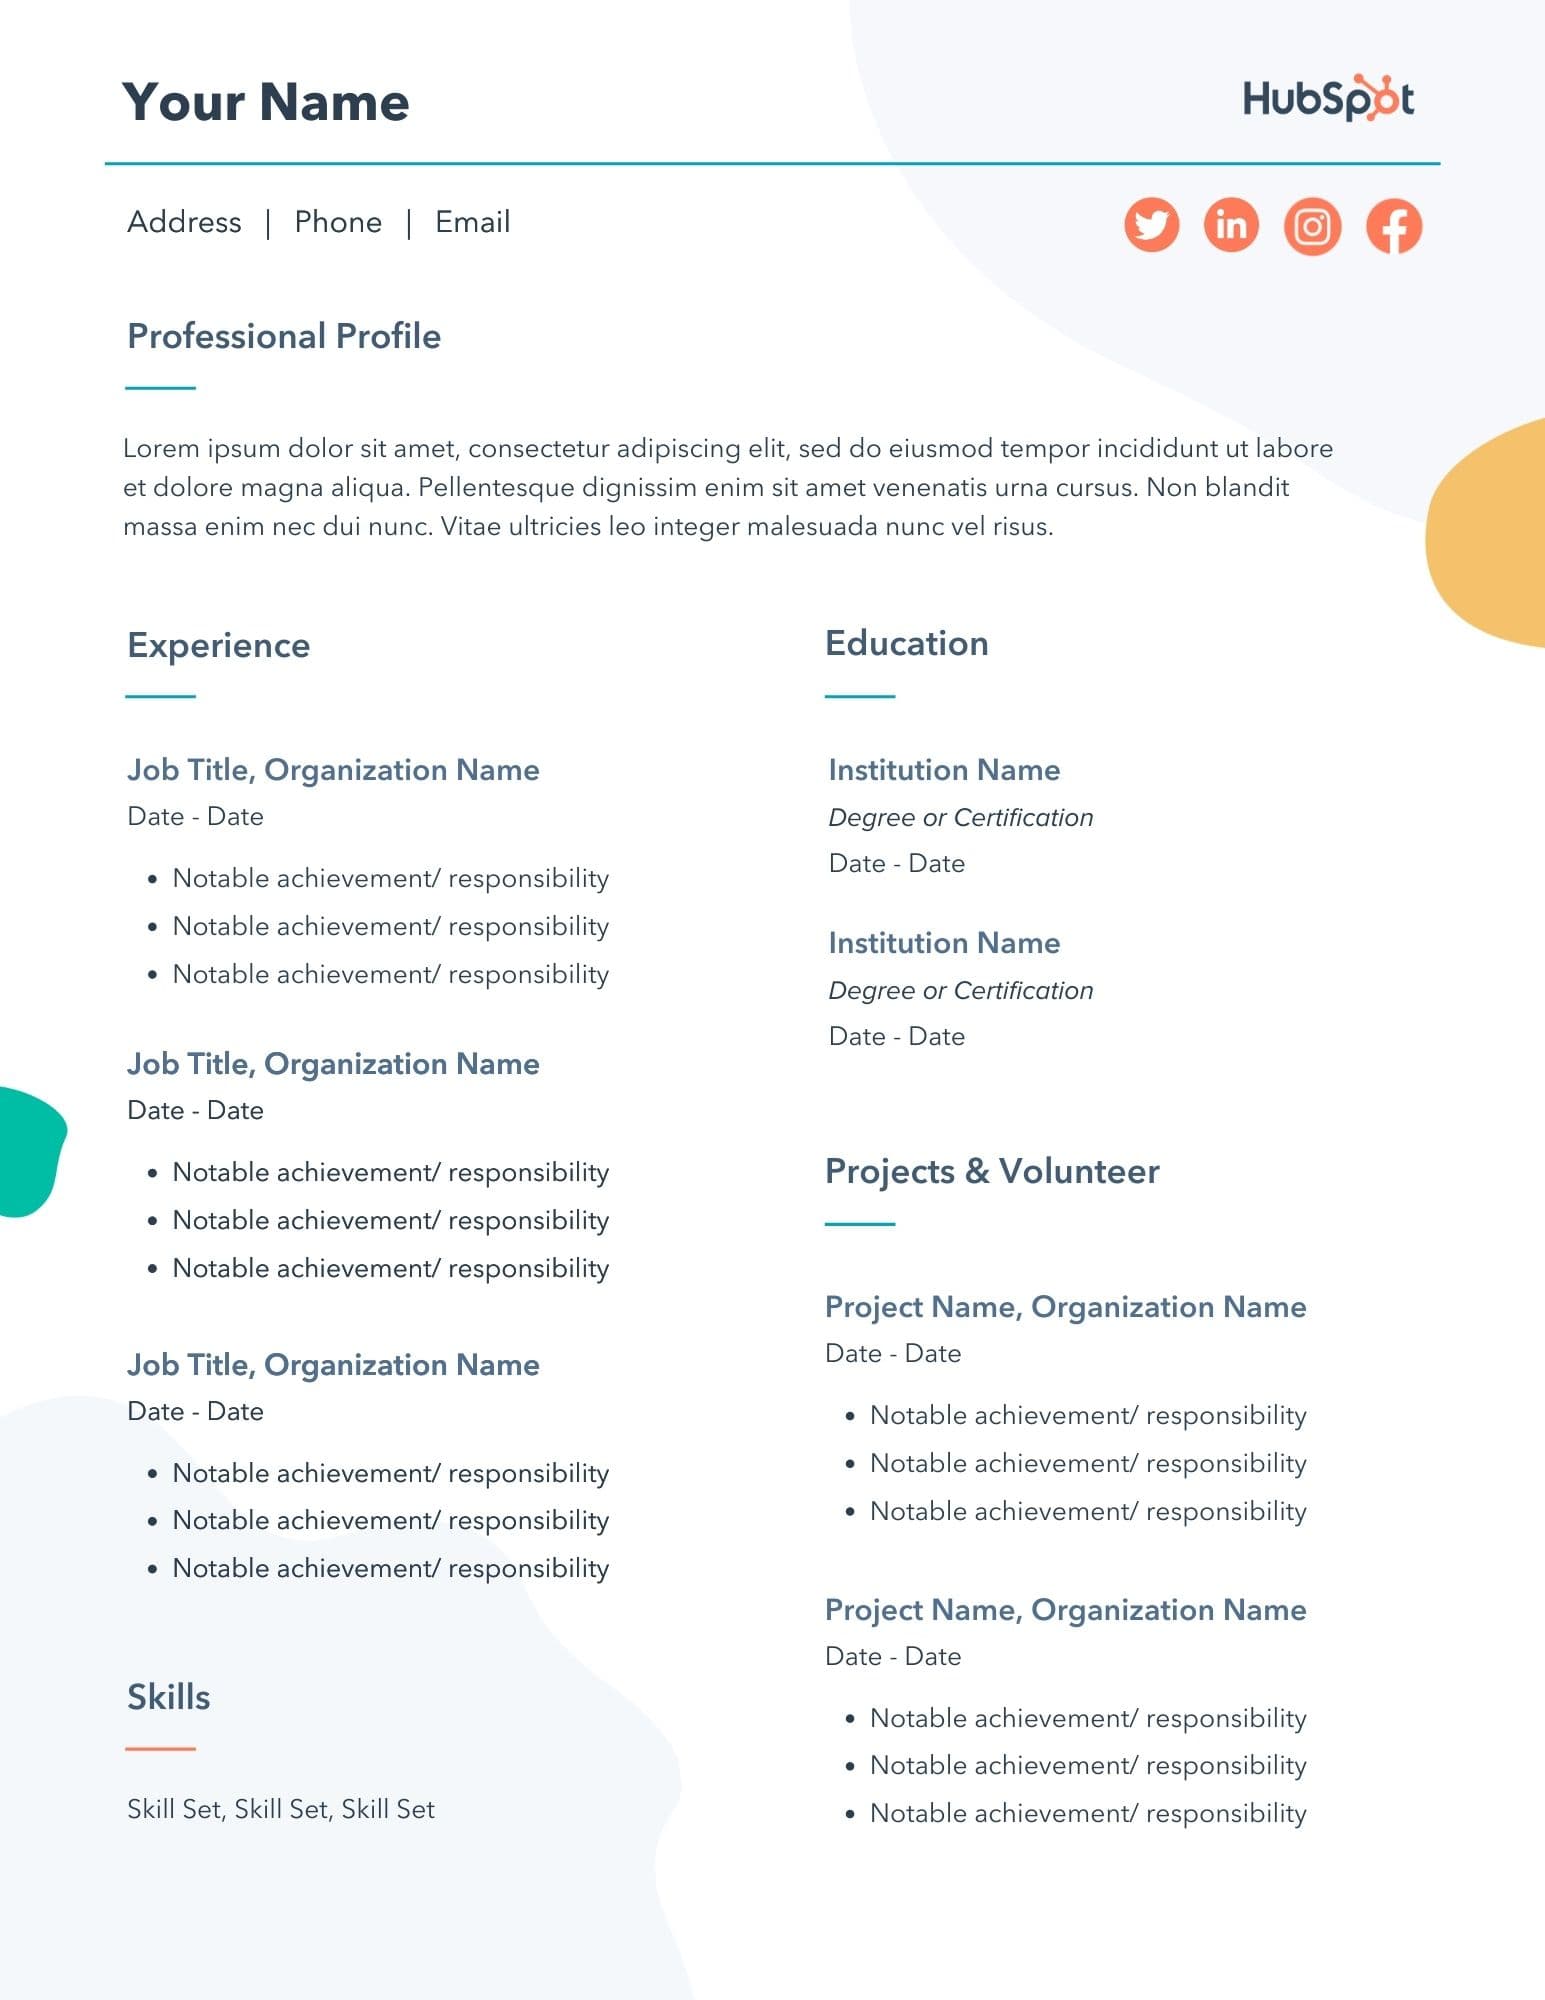 29-free-resume-templates-for-microsoft-word-how-to-make-your-own